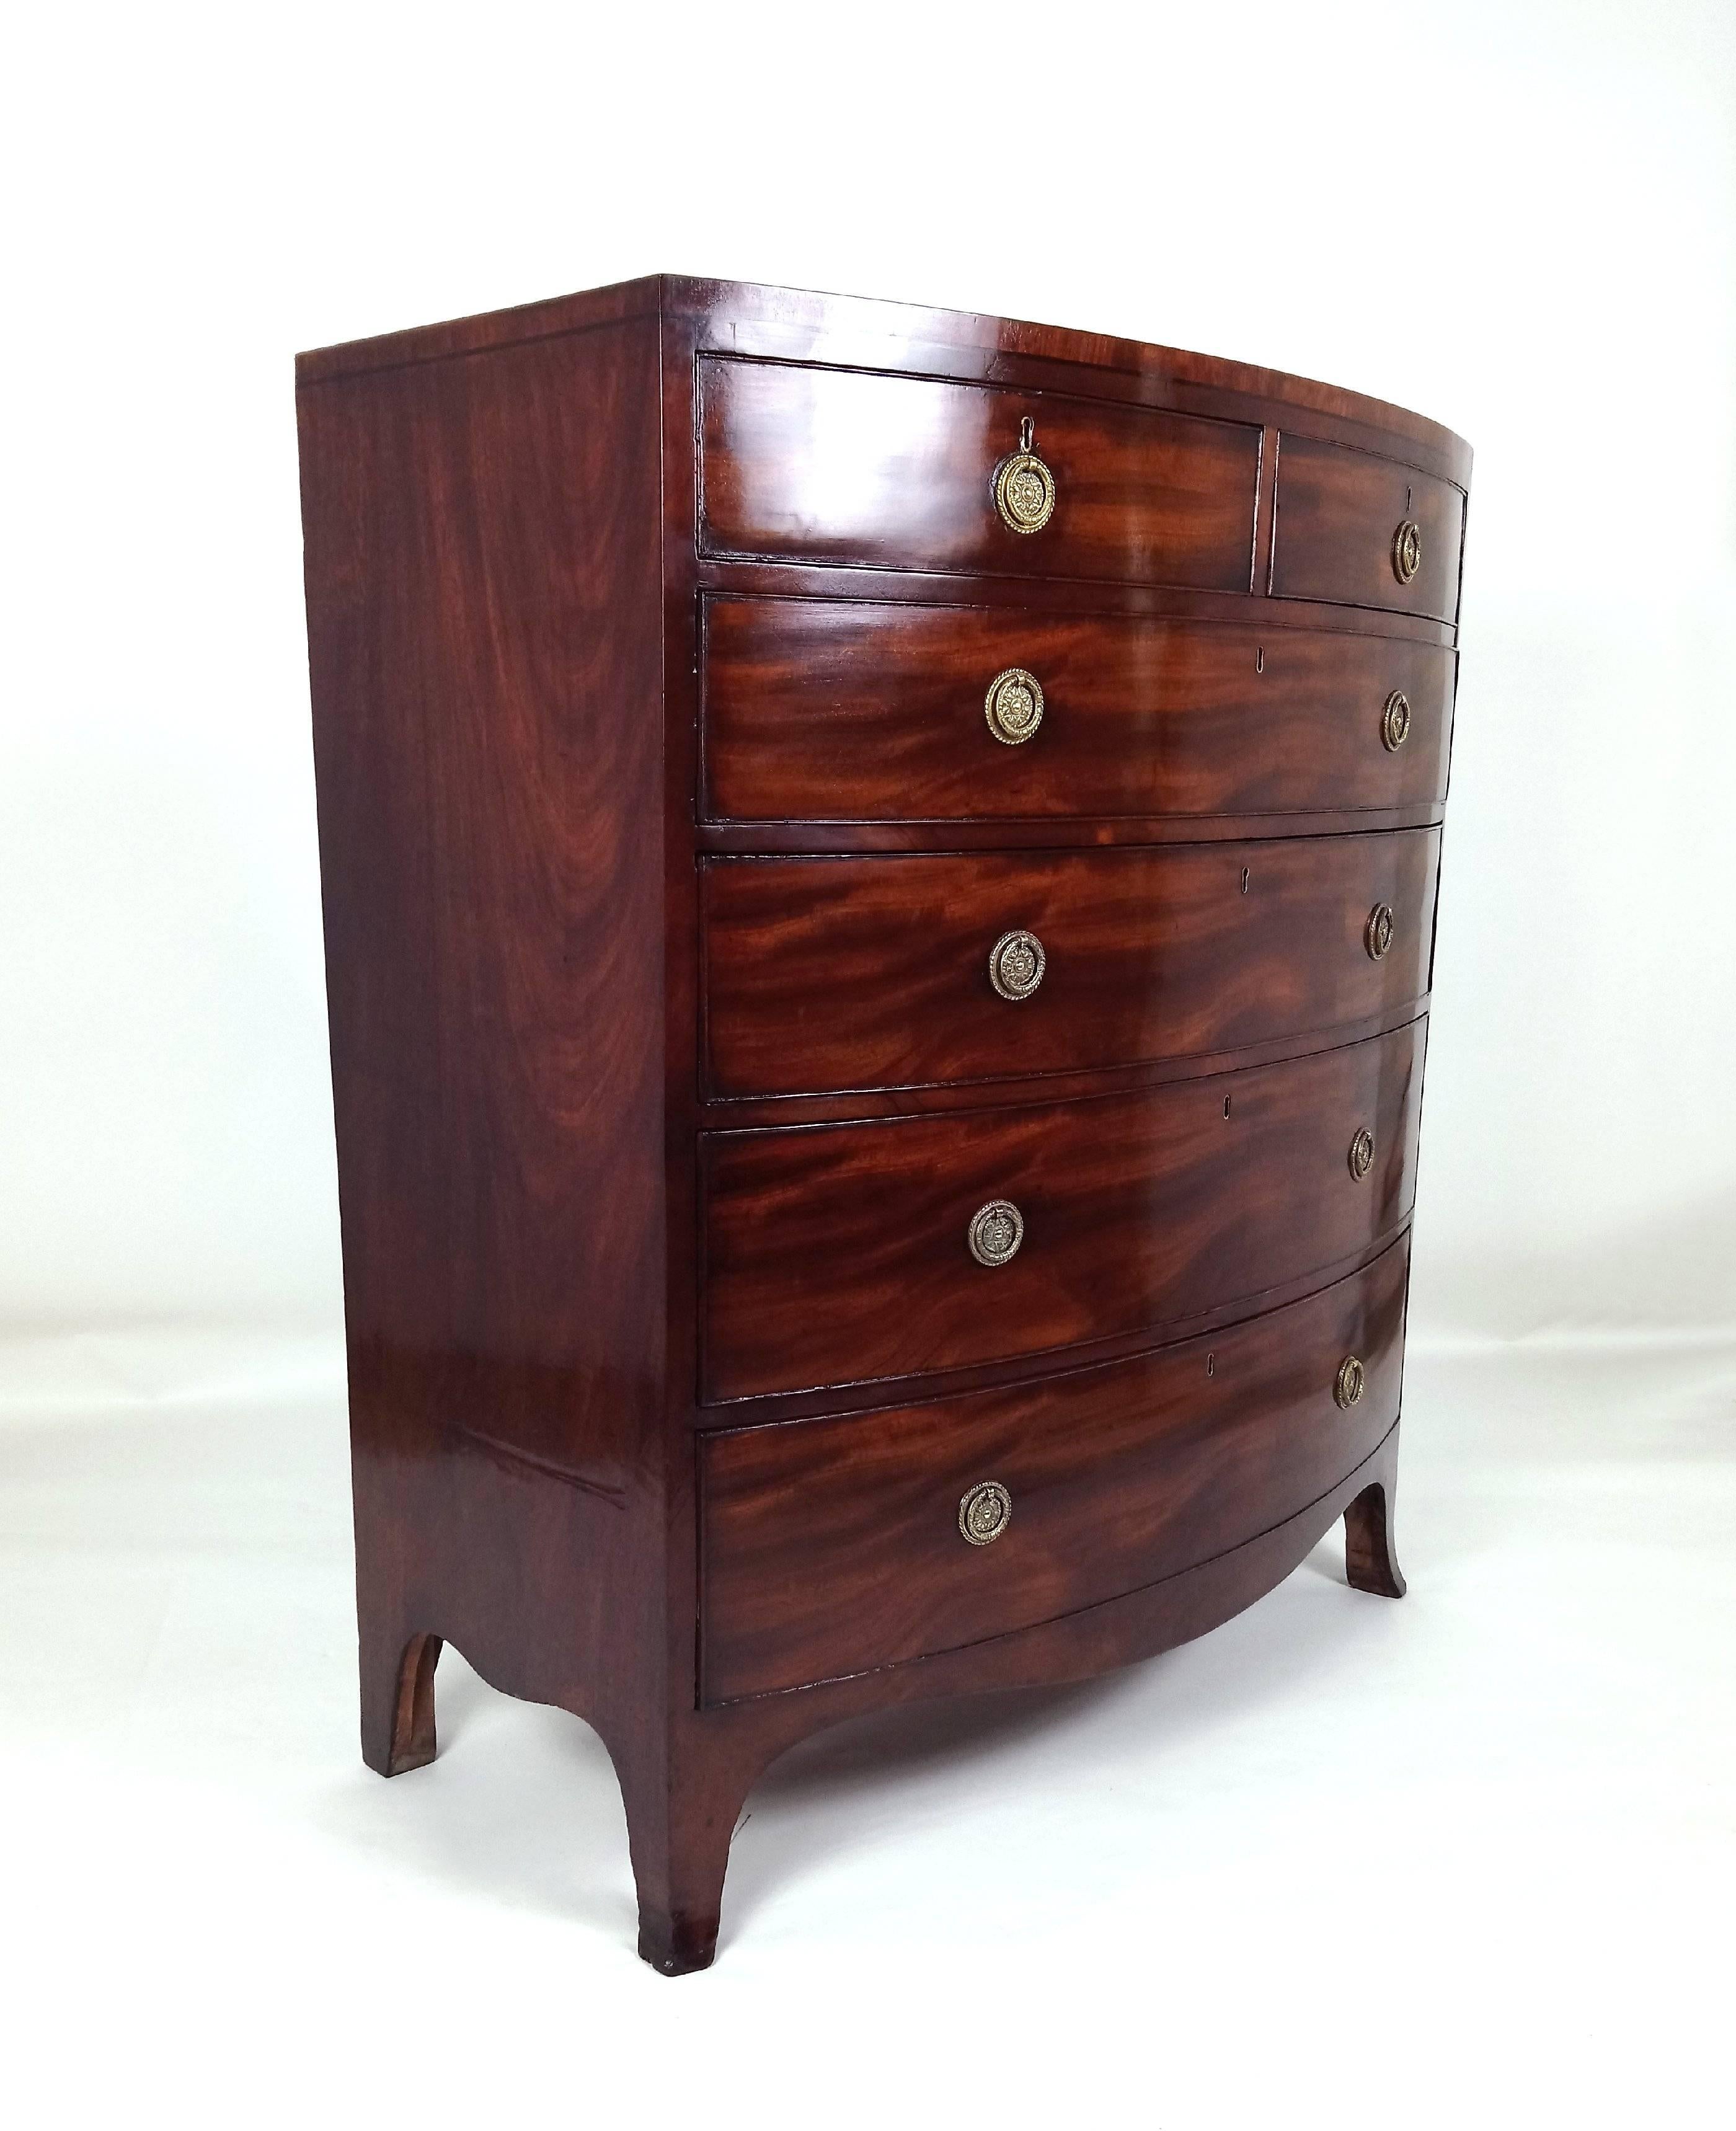 19th Century George III Large Figured Mahogany Bow Fronted Chest of Drawers